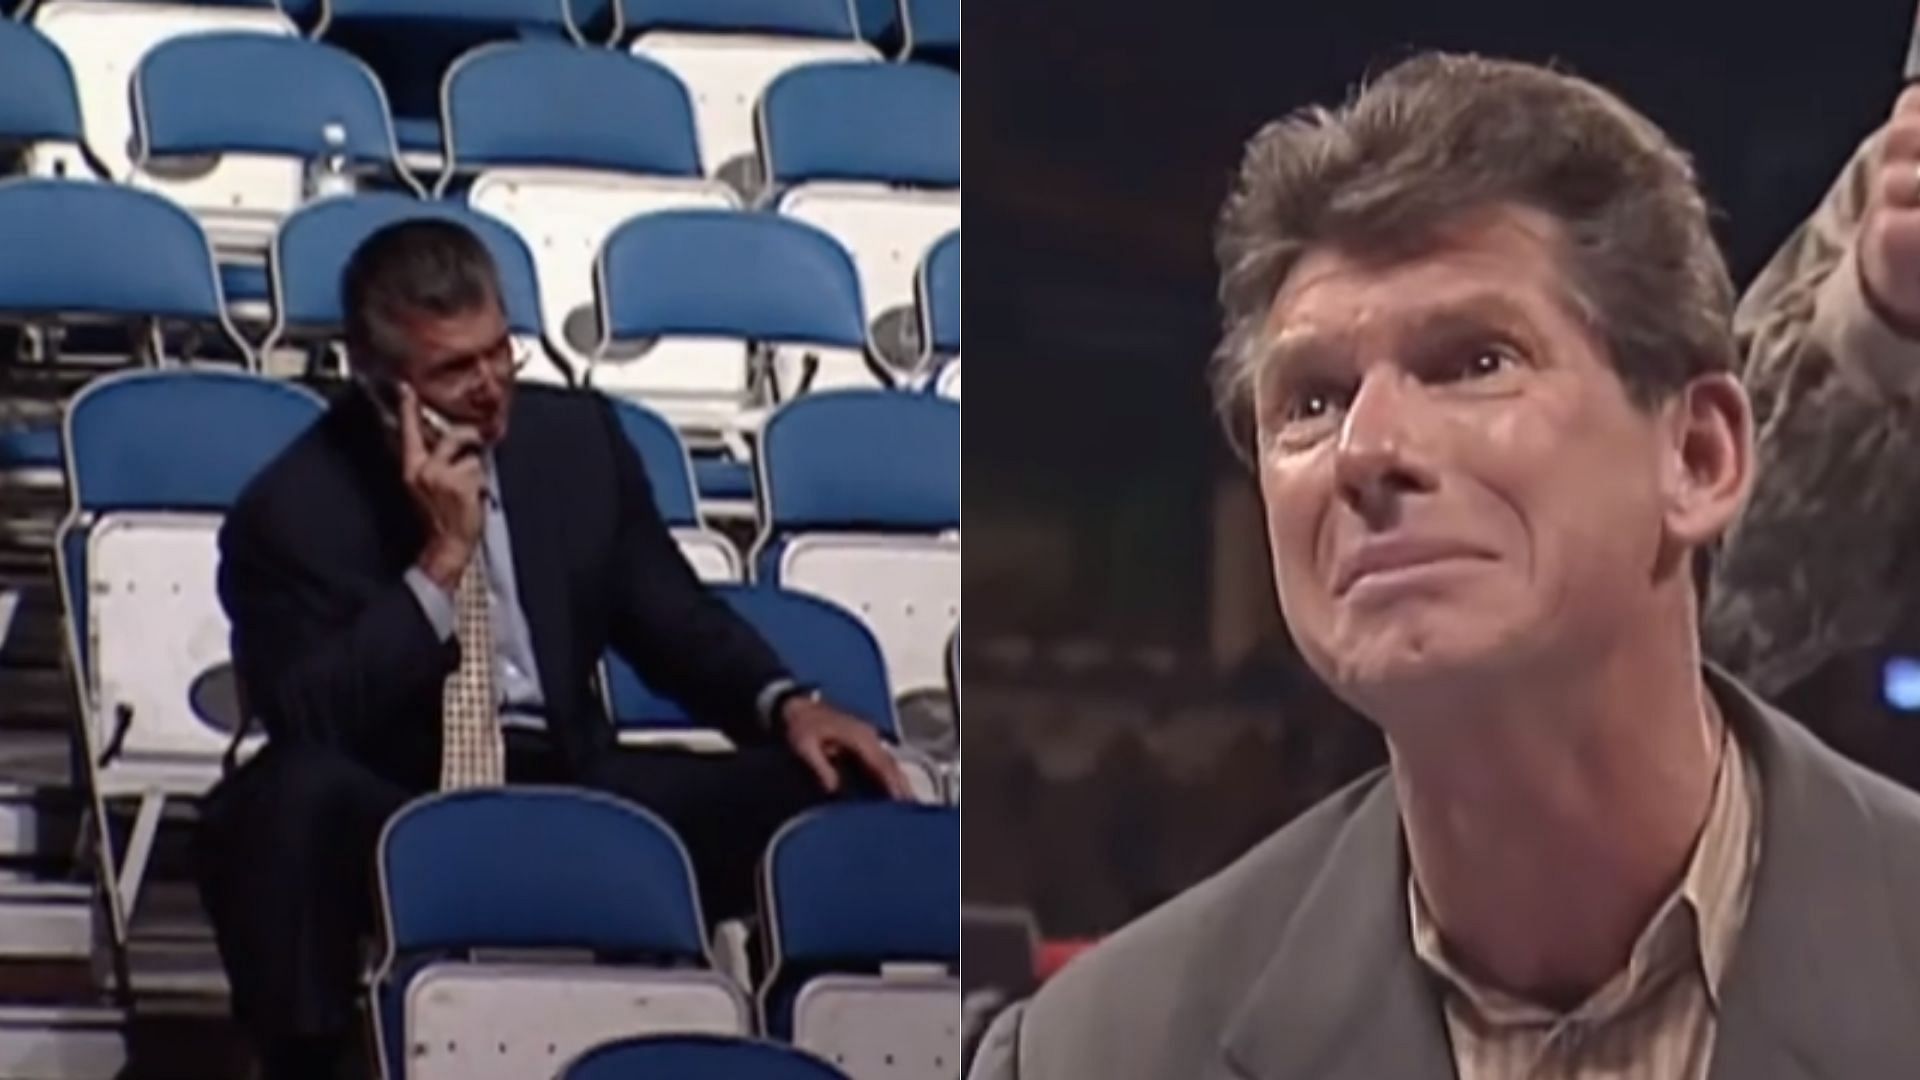 Vince McMahon was willing to make a fool of himself on television